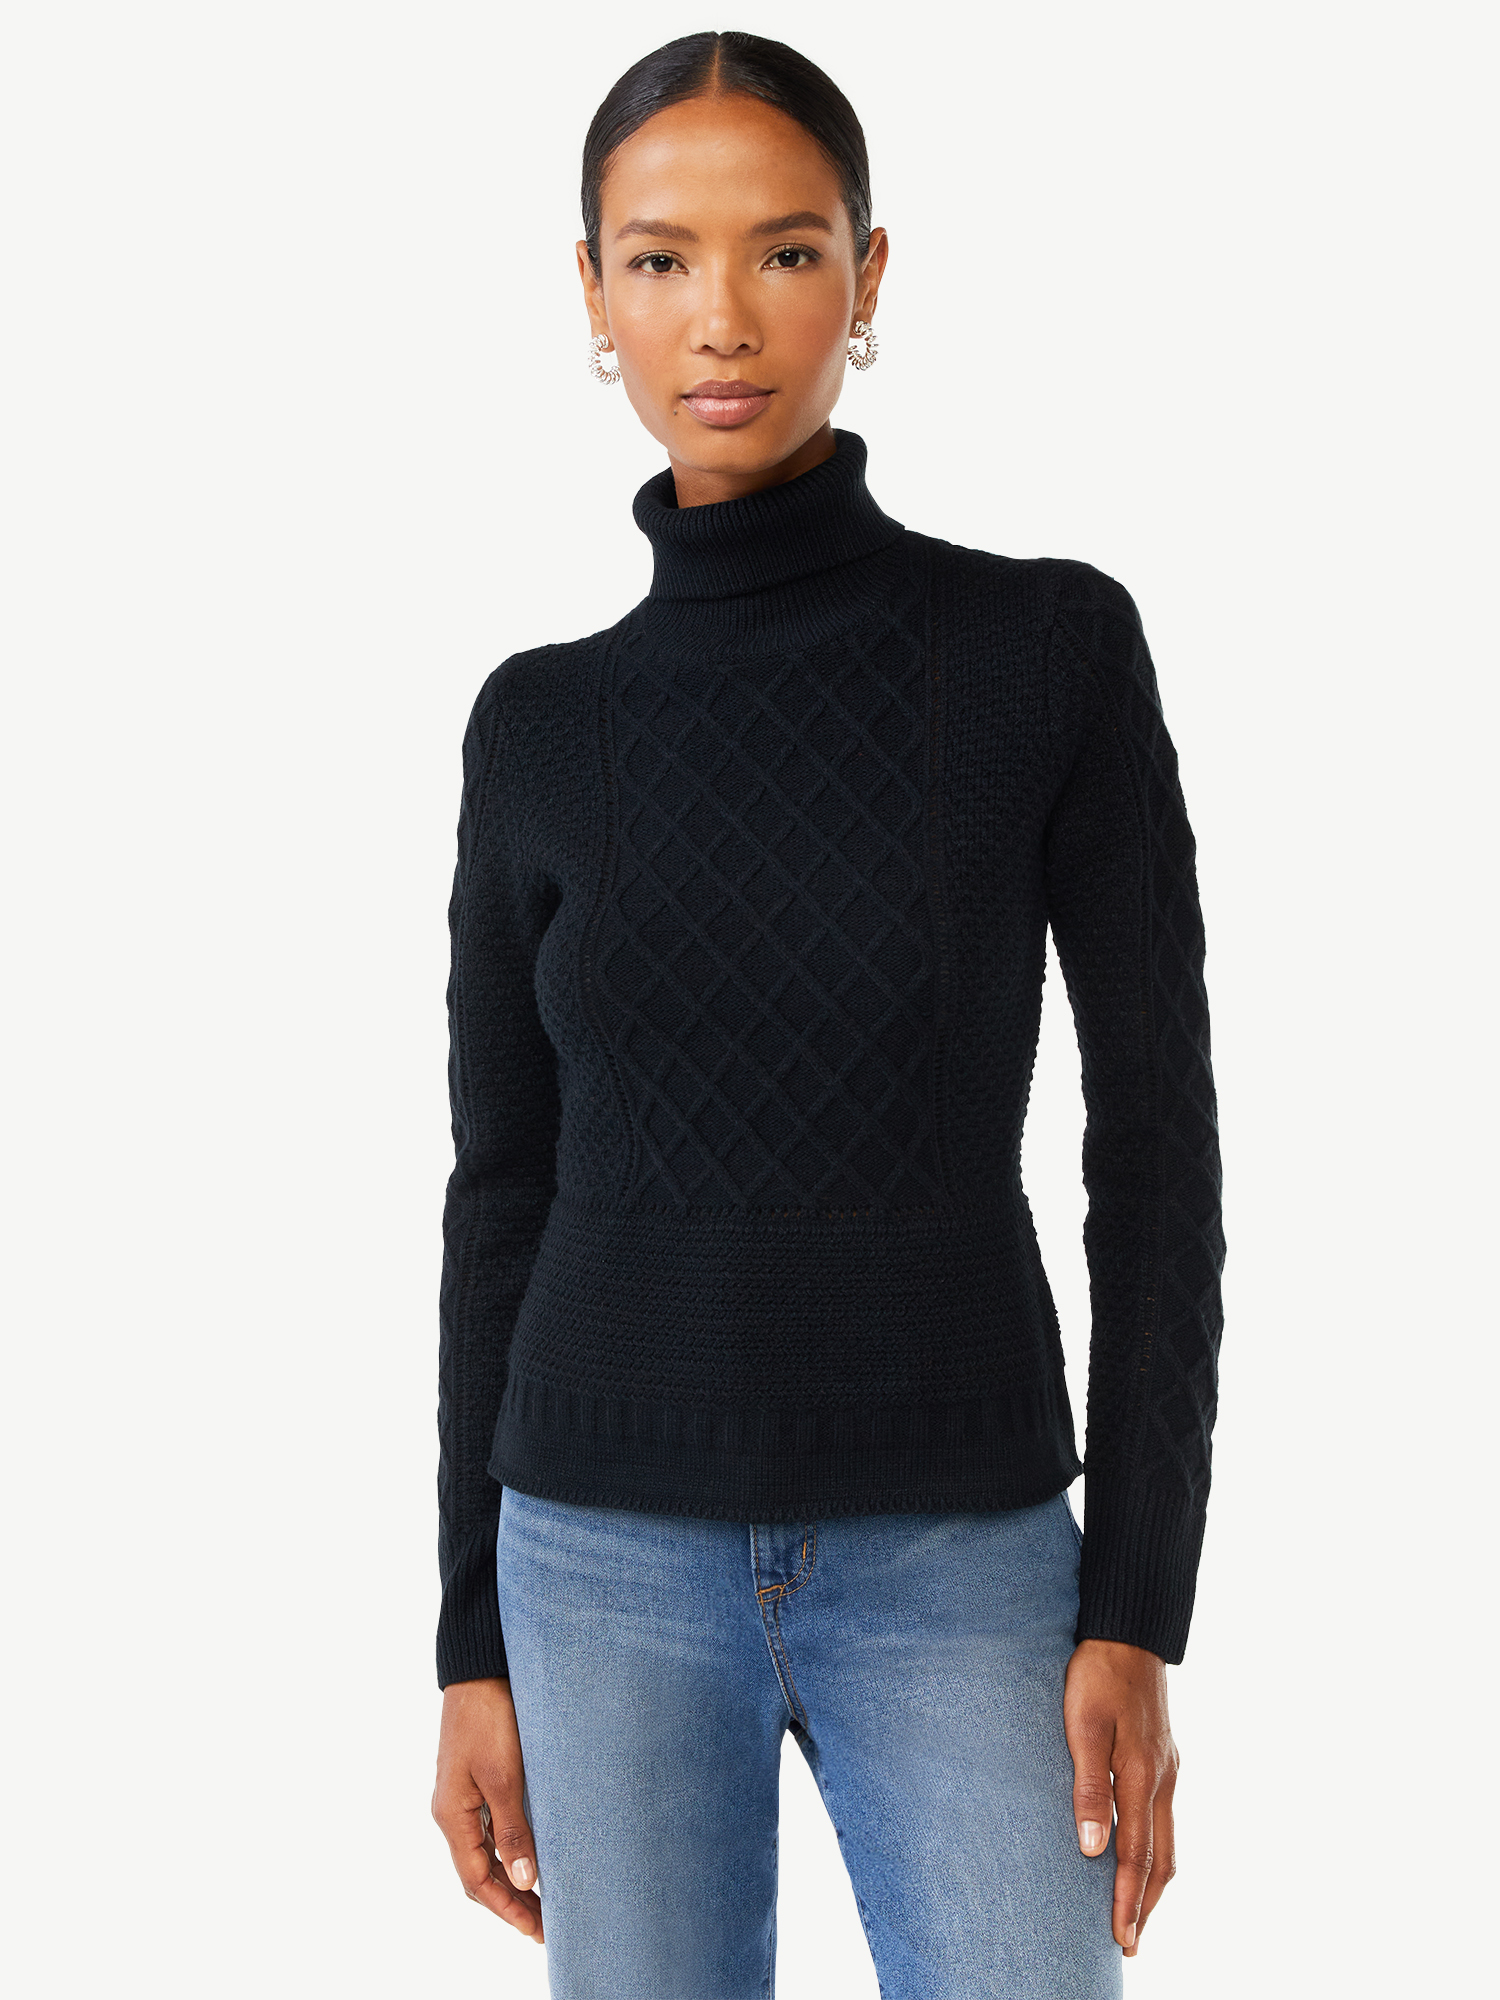 Scoop Women's Cable Knit Pullover Sweater with Long Sleeves, Sizes XS-XXL - image 1 of 5